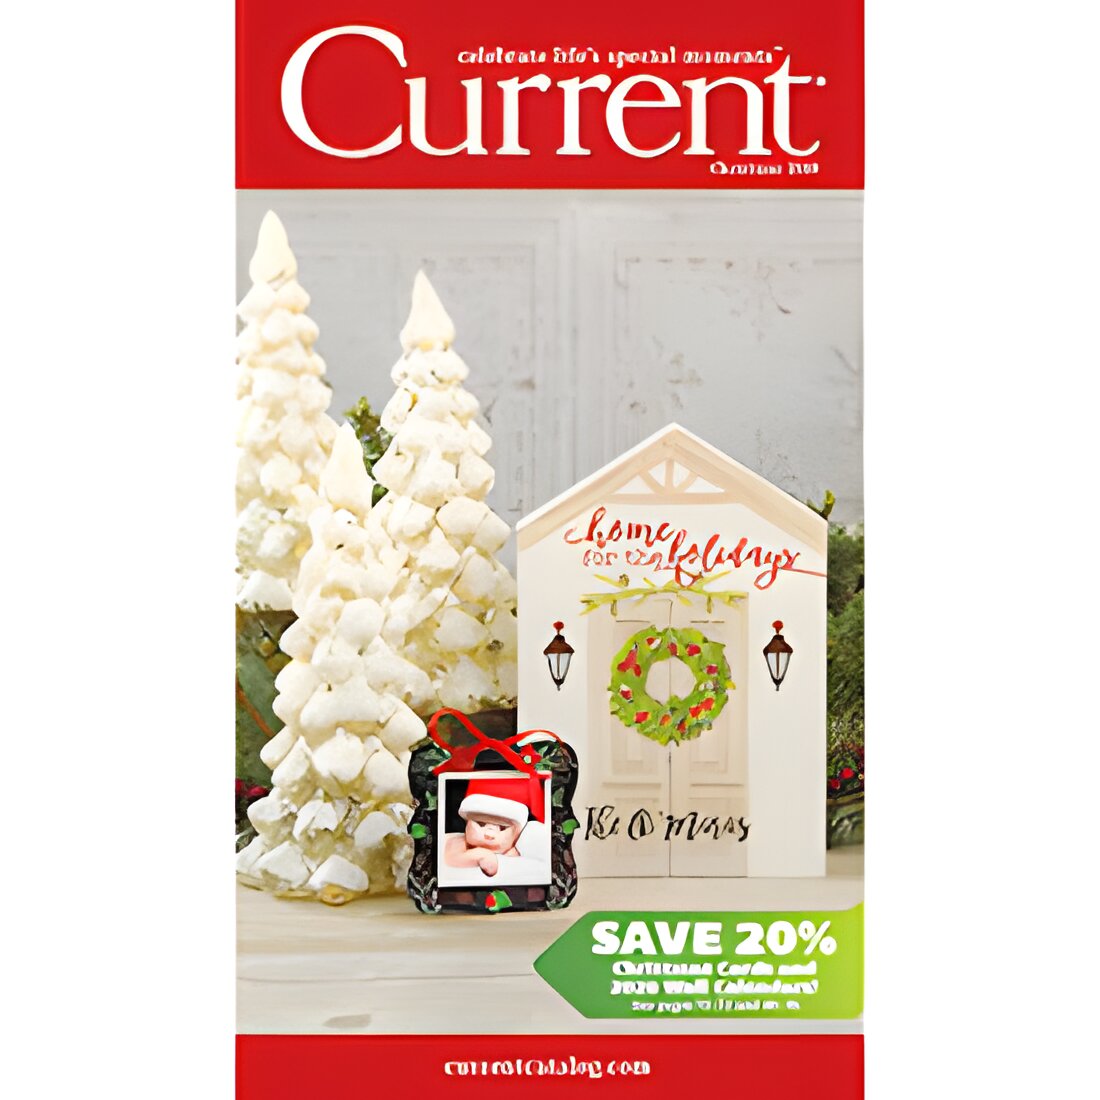 Free Copy of Current Catalog